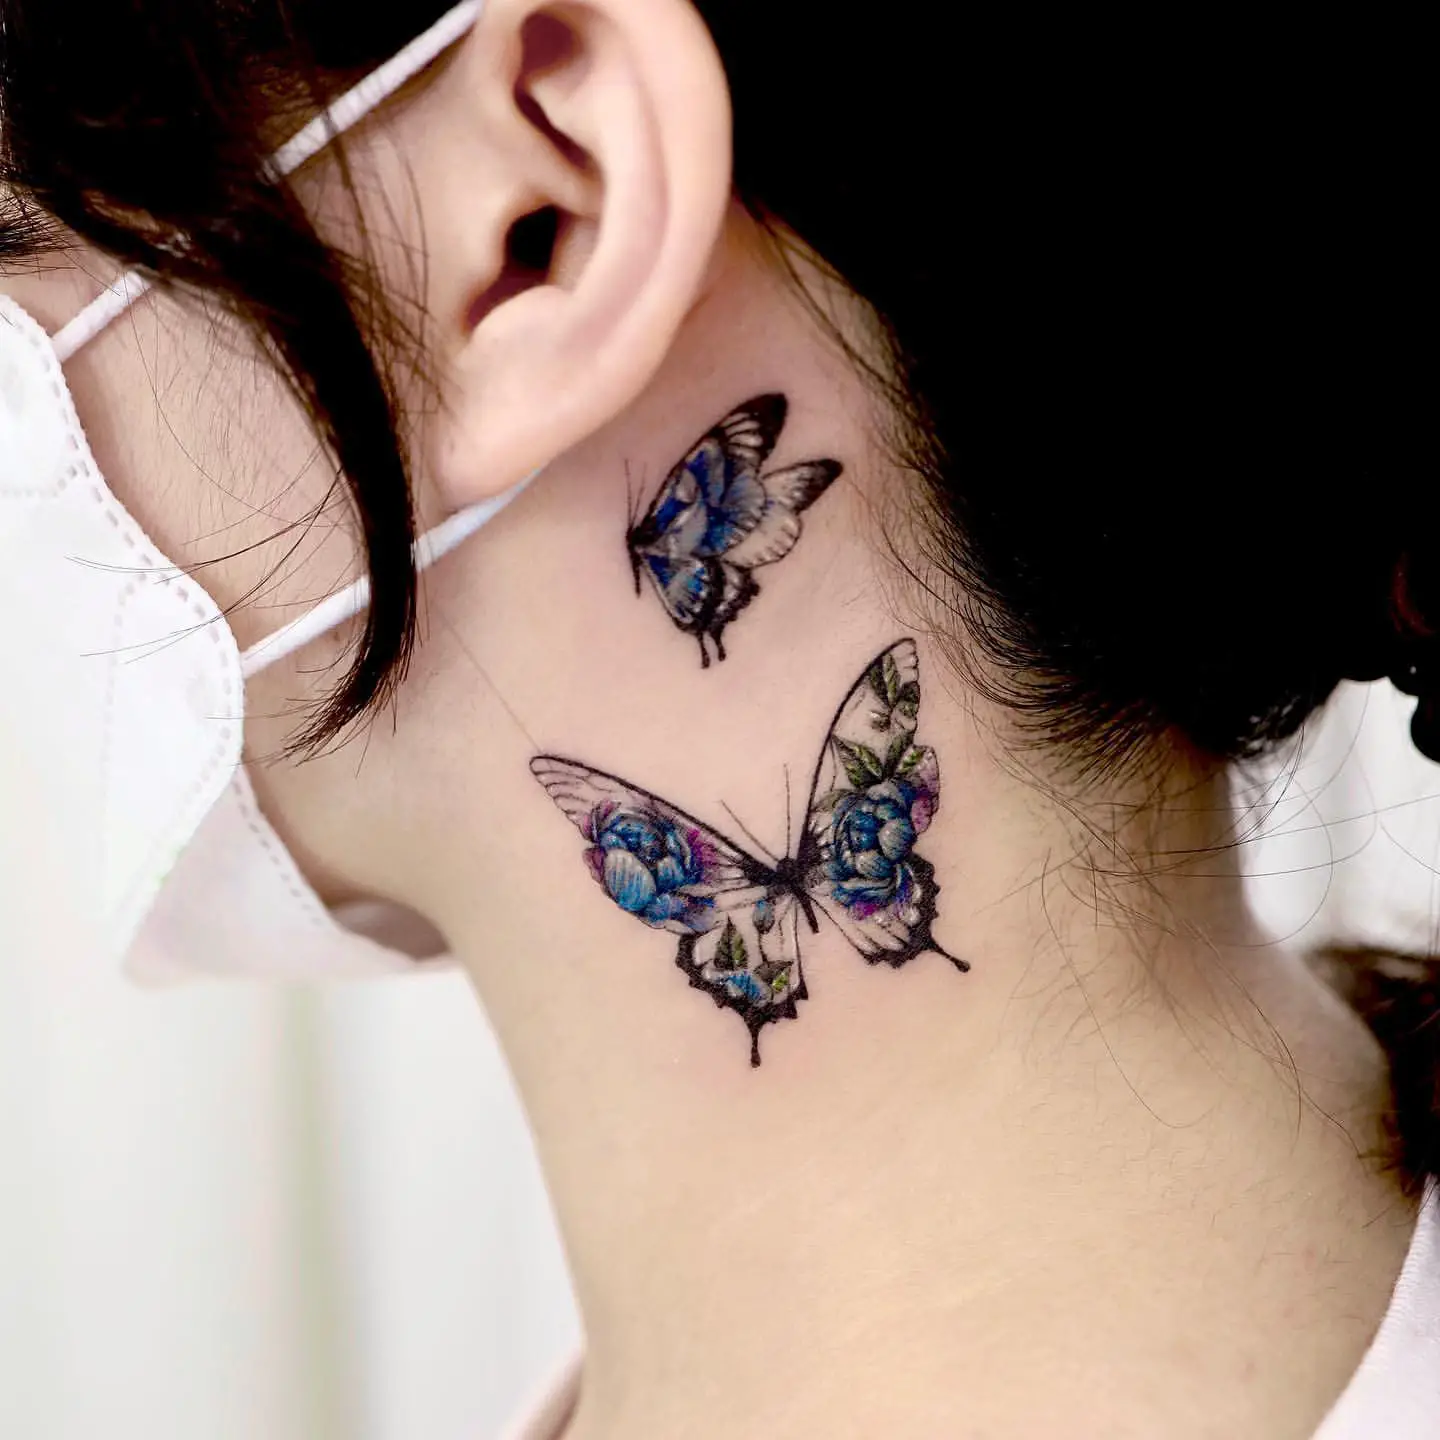 Beautiful Black and Gray with Watercolor Butterfly Tattoos